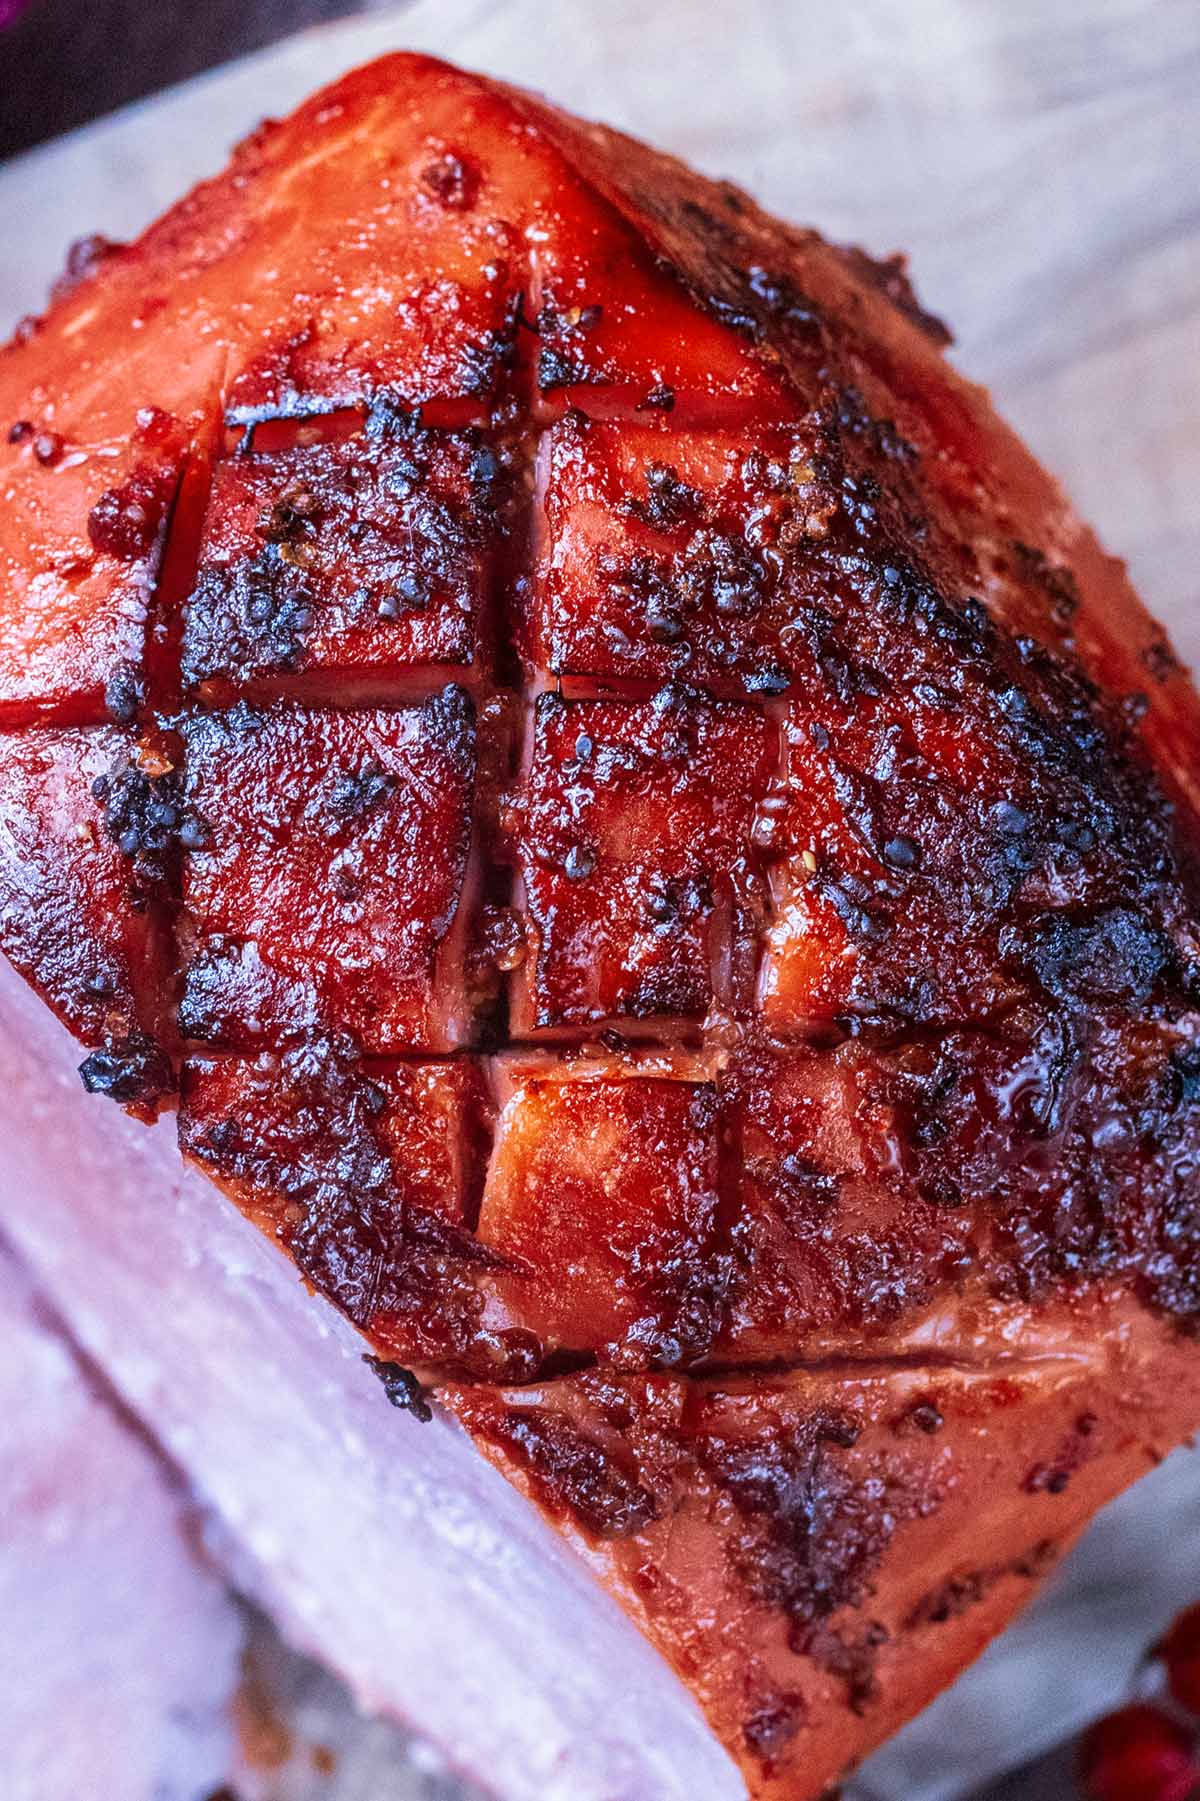 Scored and glazed top of a cooked gammon joint.